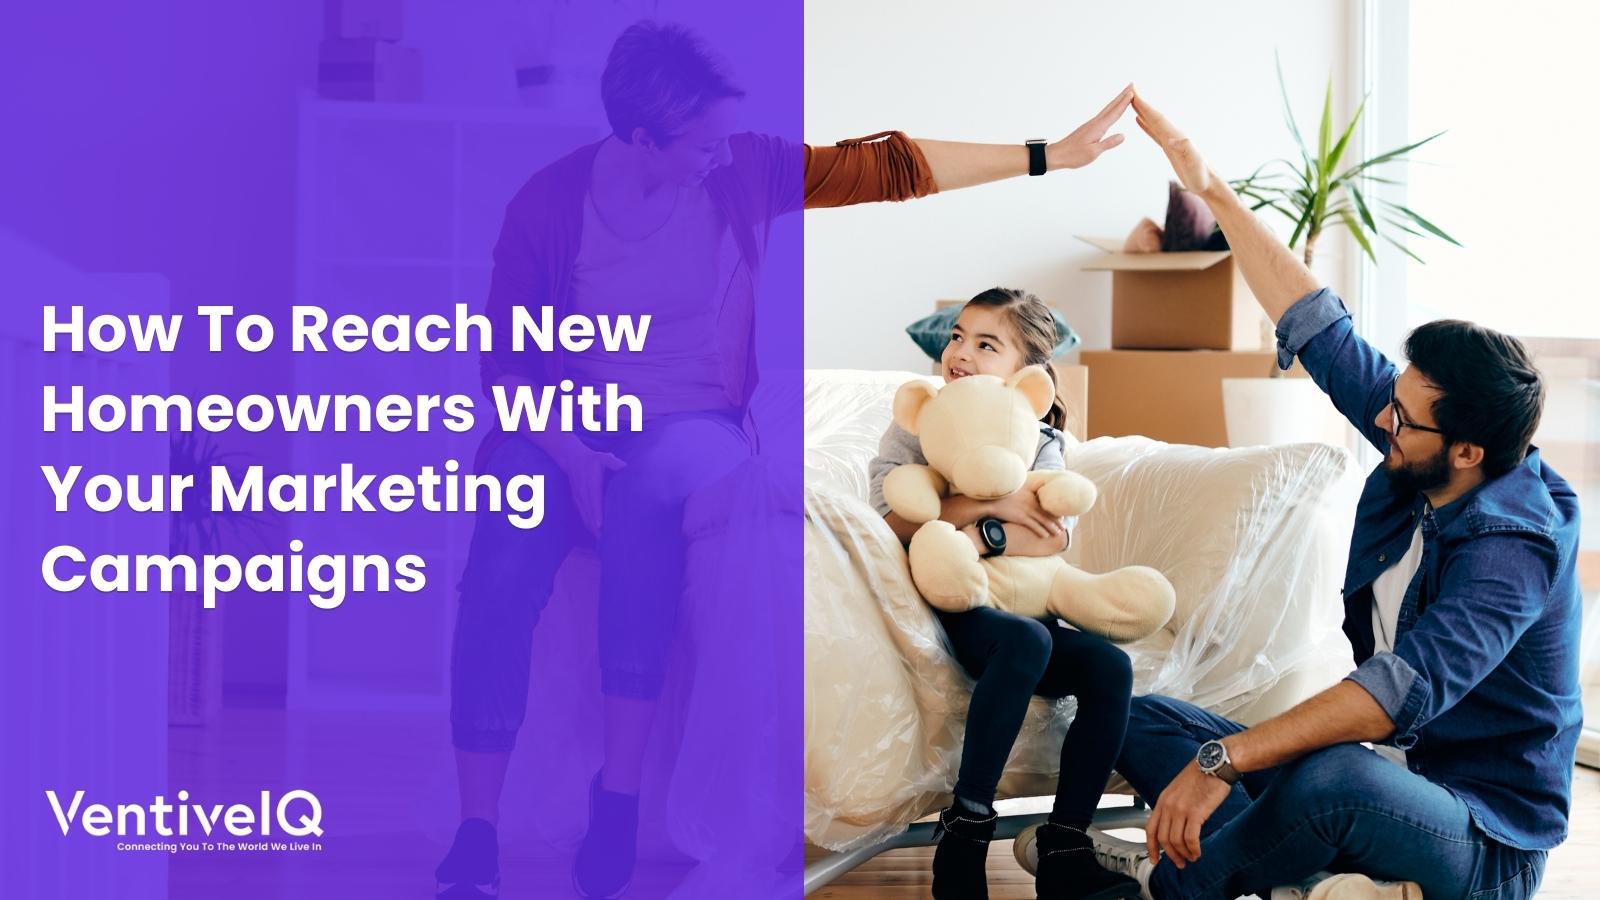 How To Reach New Homeowners with Your Marketing Campaigns